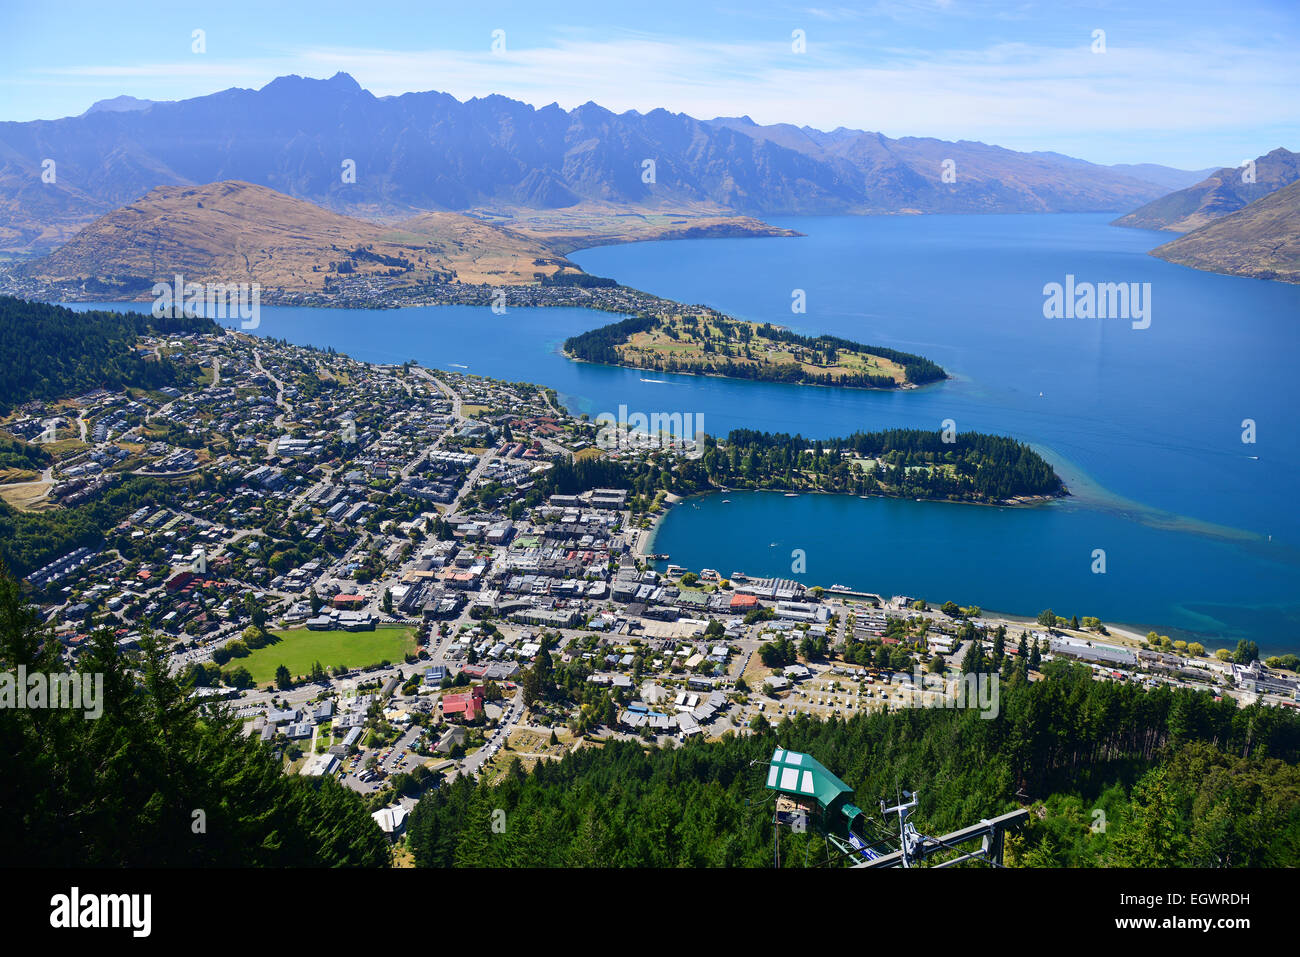 View of Queenstown, dubbed the Adventure Capital Of The World on the shores of Lake Wakatipu, Otago, South Island, New Zealand. Stock Photo